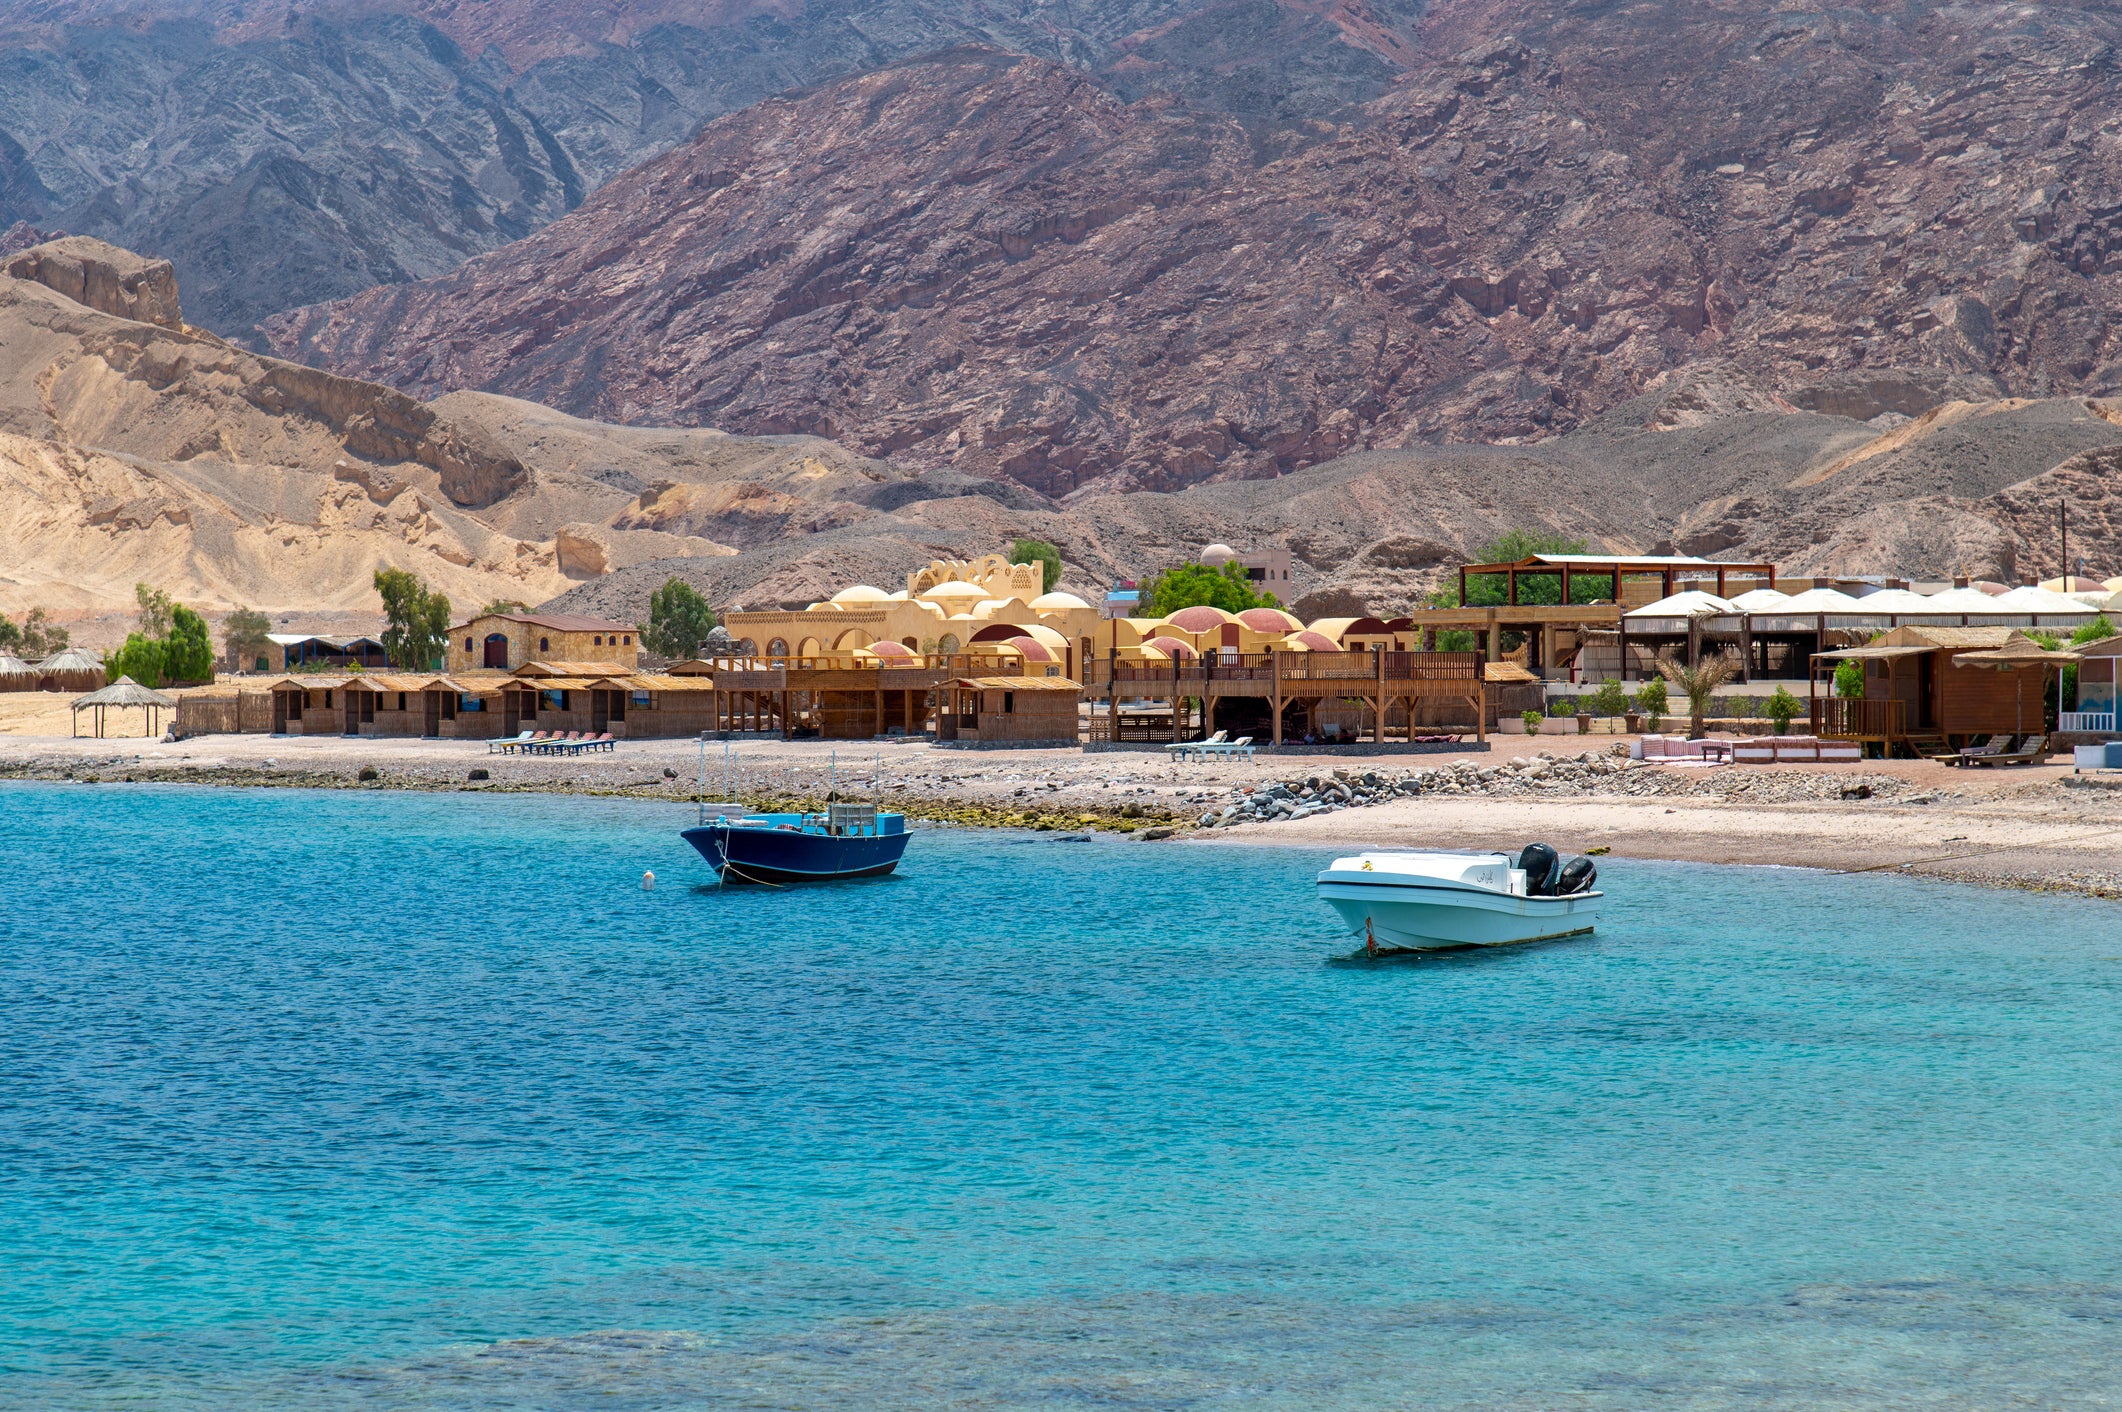 The former Bedouin fishing village is now a laid-back spot for water sports